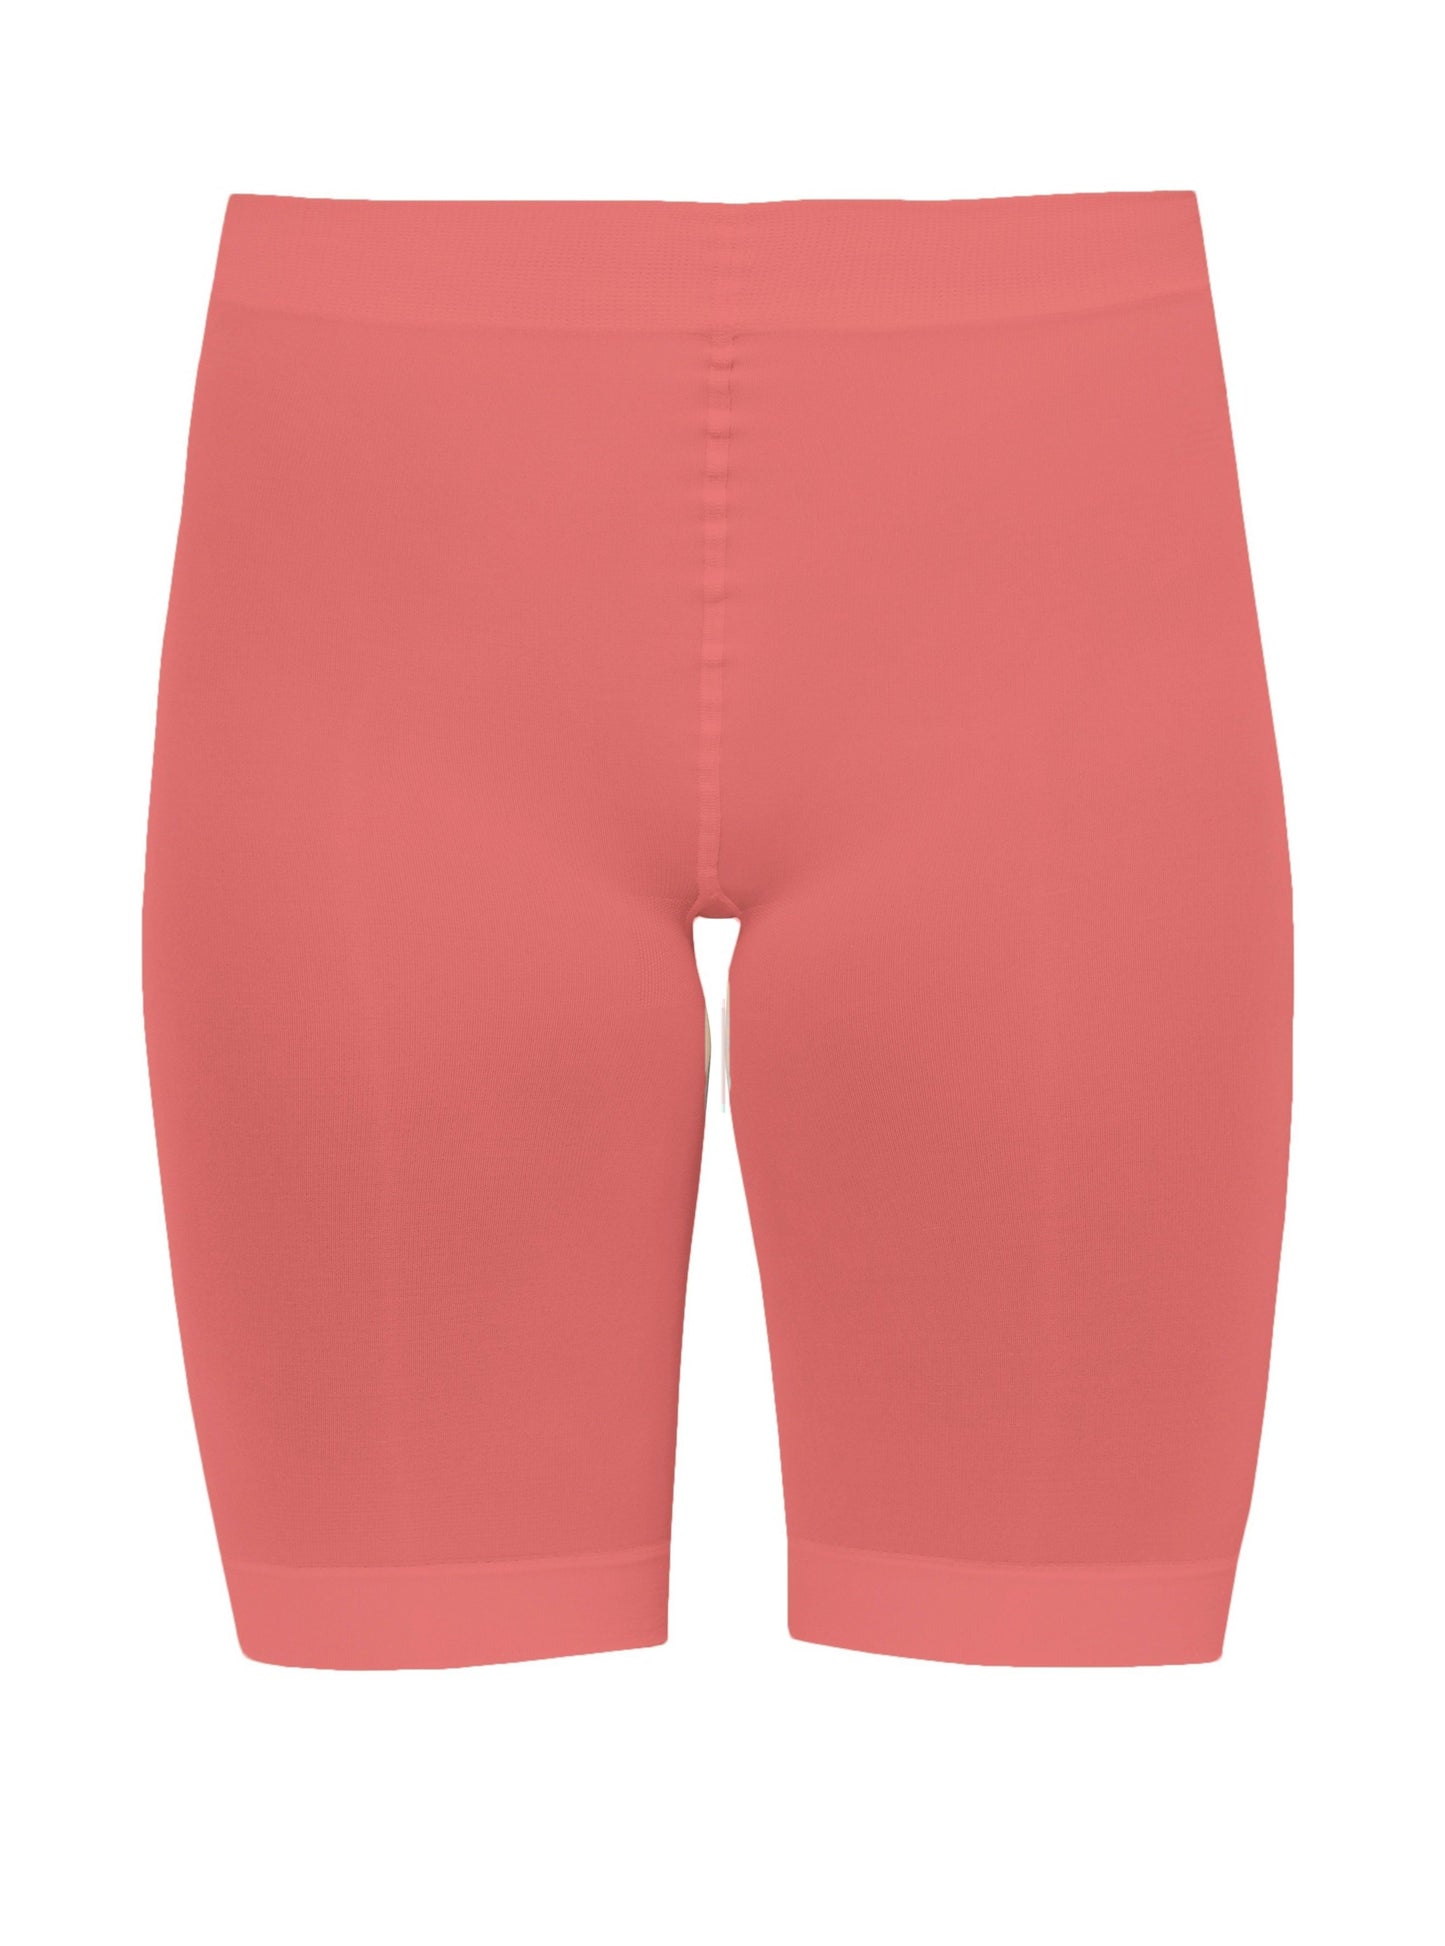 Sneaky Fox Microfibre Shorts - Coral pink soft matte opaque knee length bicycle short tights with cotton gusset and flat seams.